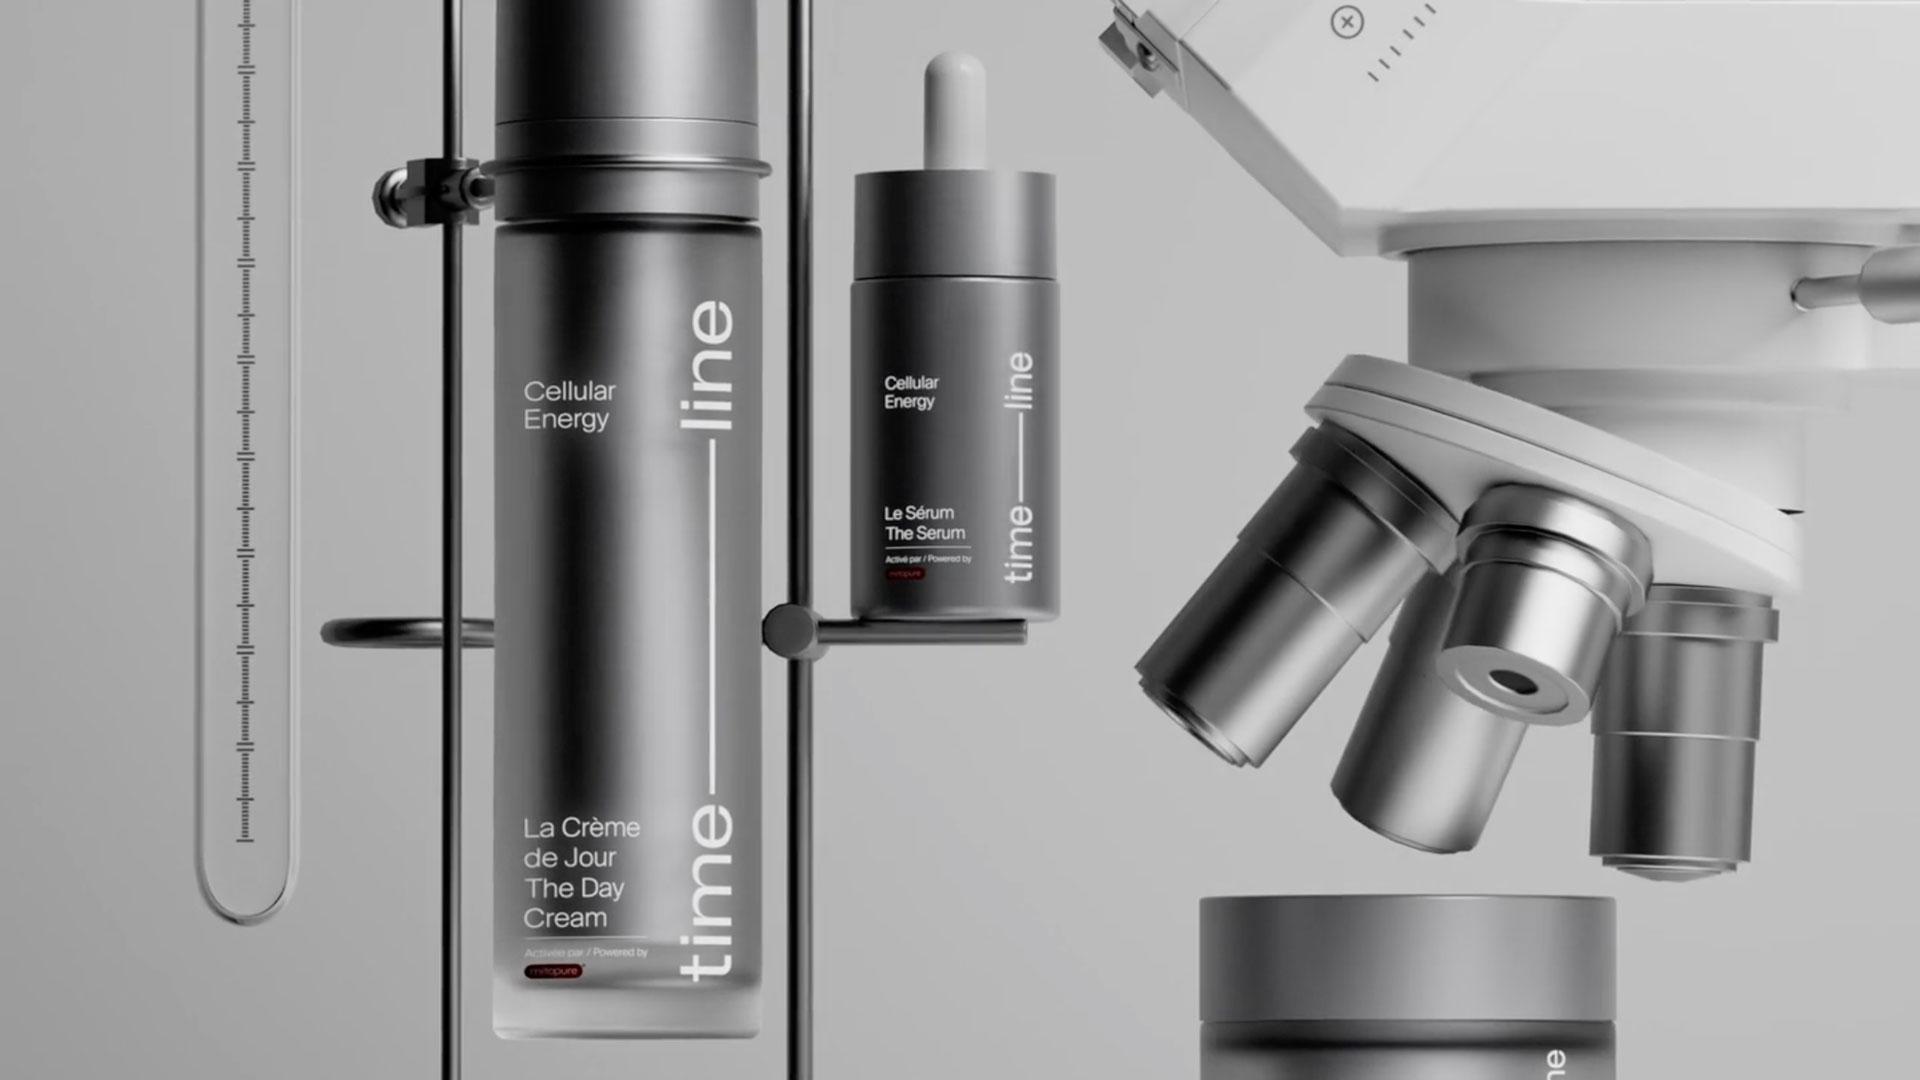 DissEmbargo Shakes up Skin Science With Timeline Nutrition Brand Film – Motion design [Video]